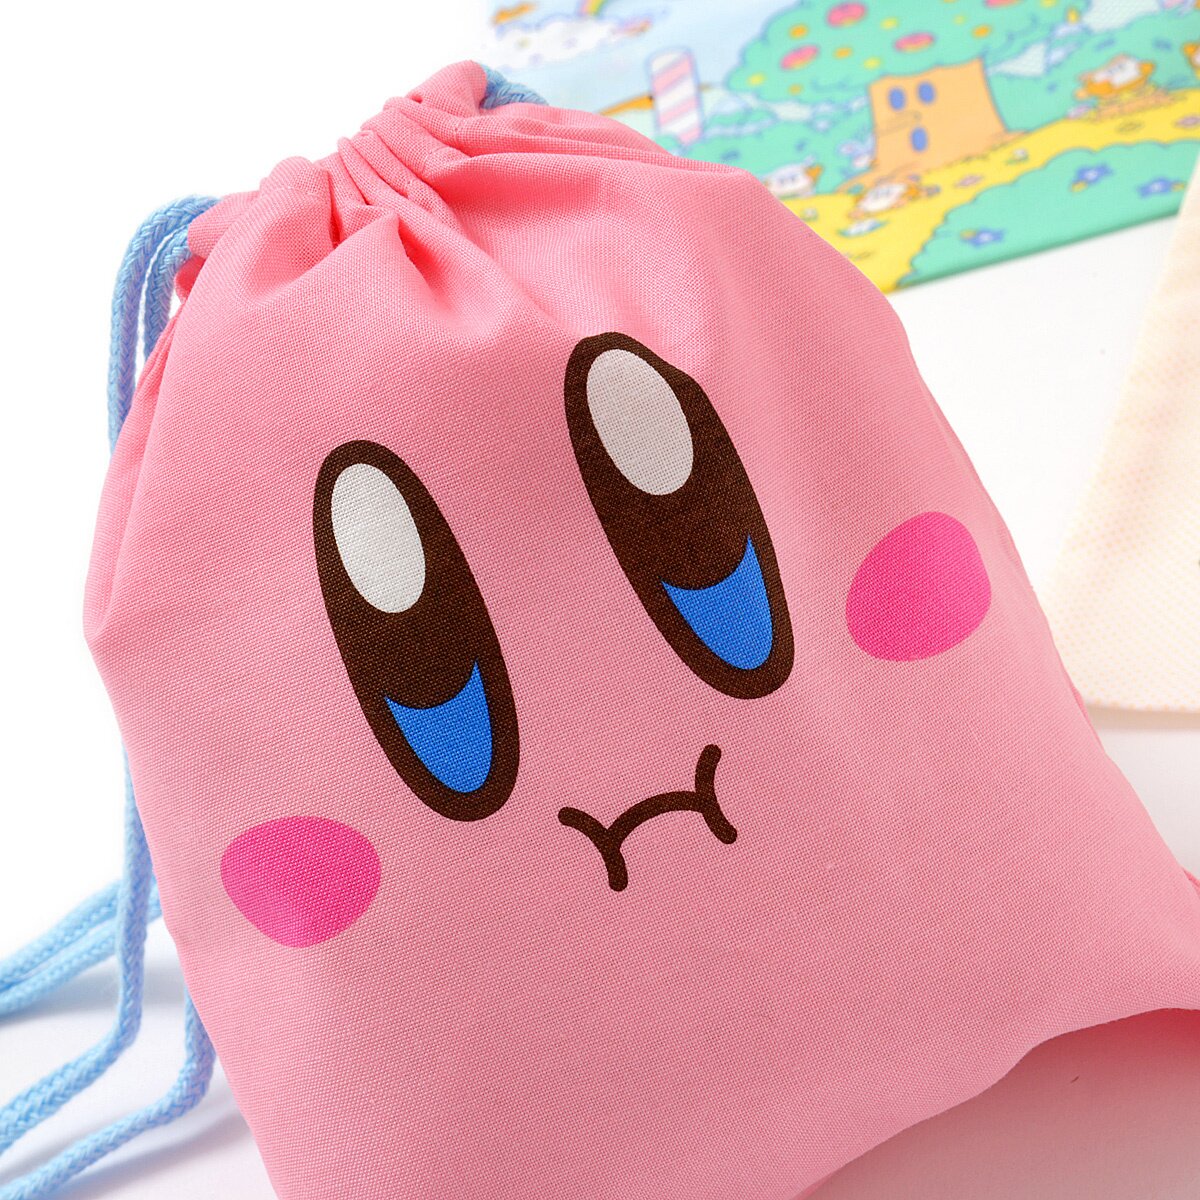 Drawstring lunch bag Kirby of the stars made in Japan KB-1